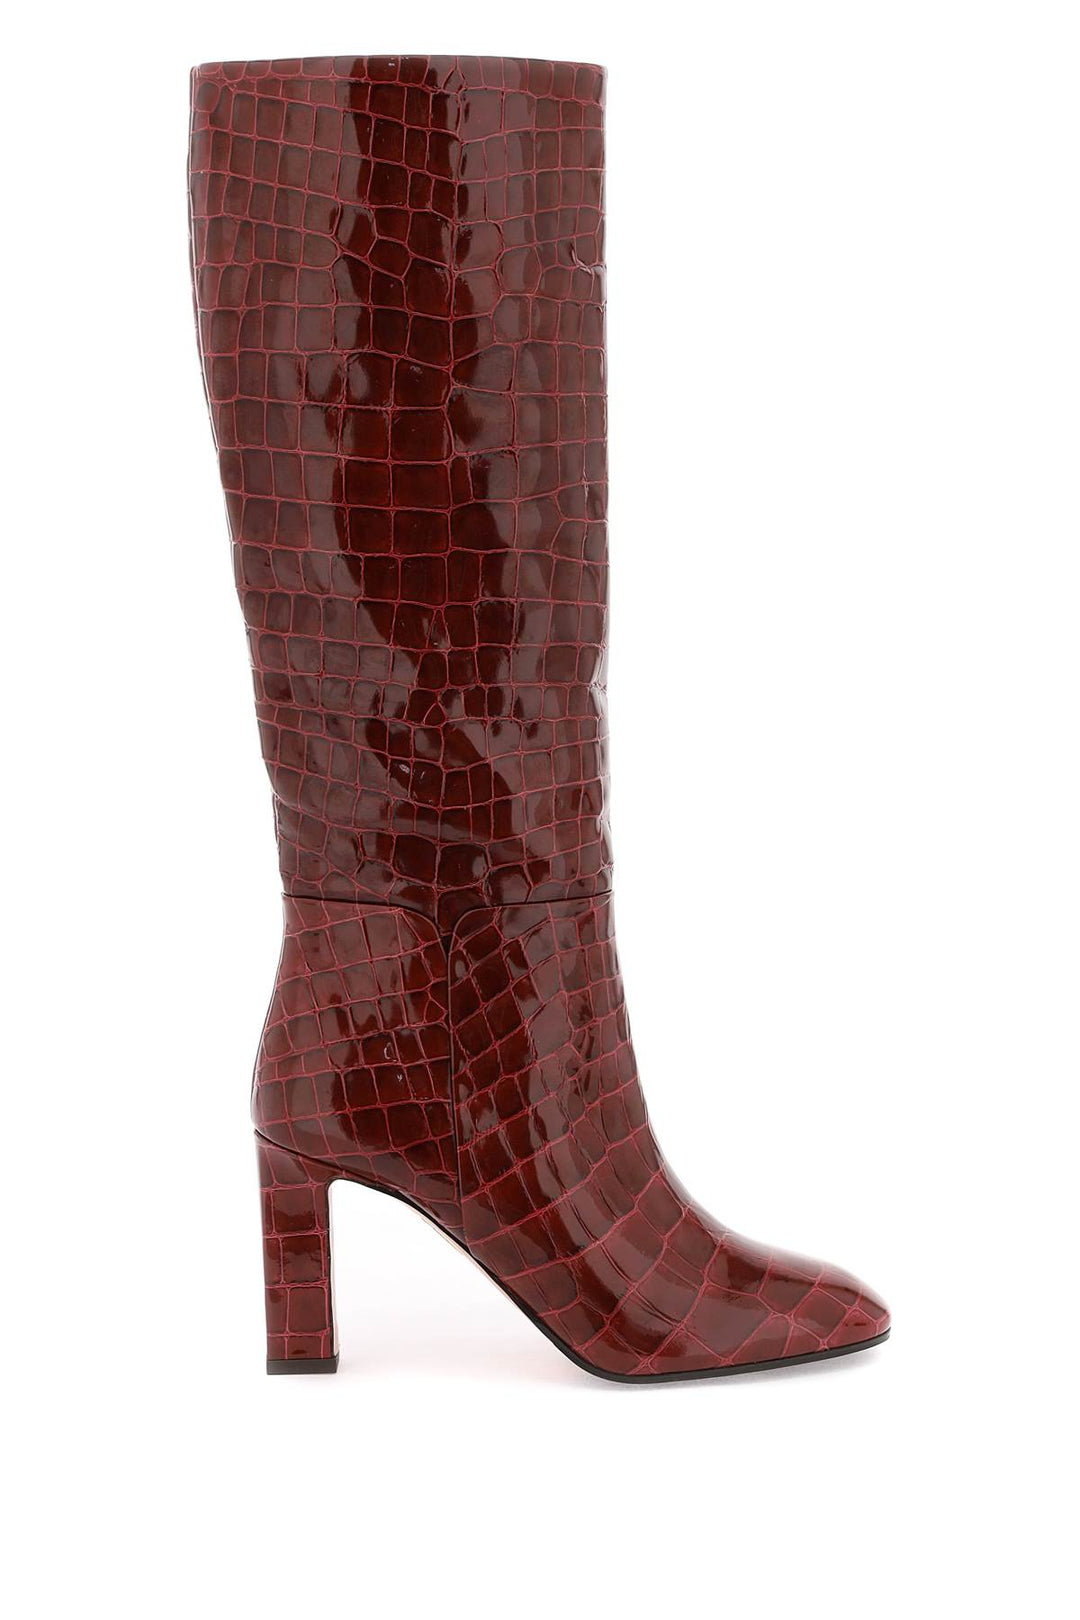 Aquazzura Sellier Boots In Croc Embossed Leather   Rosso